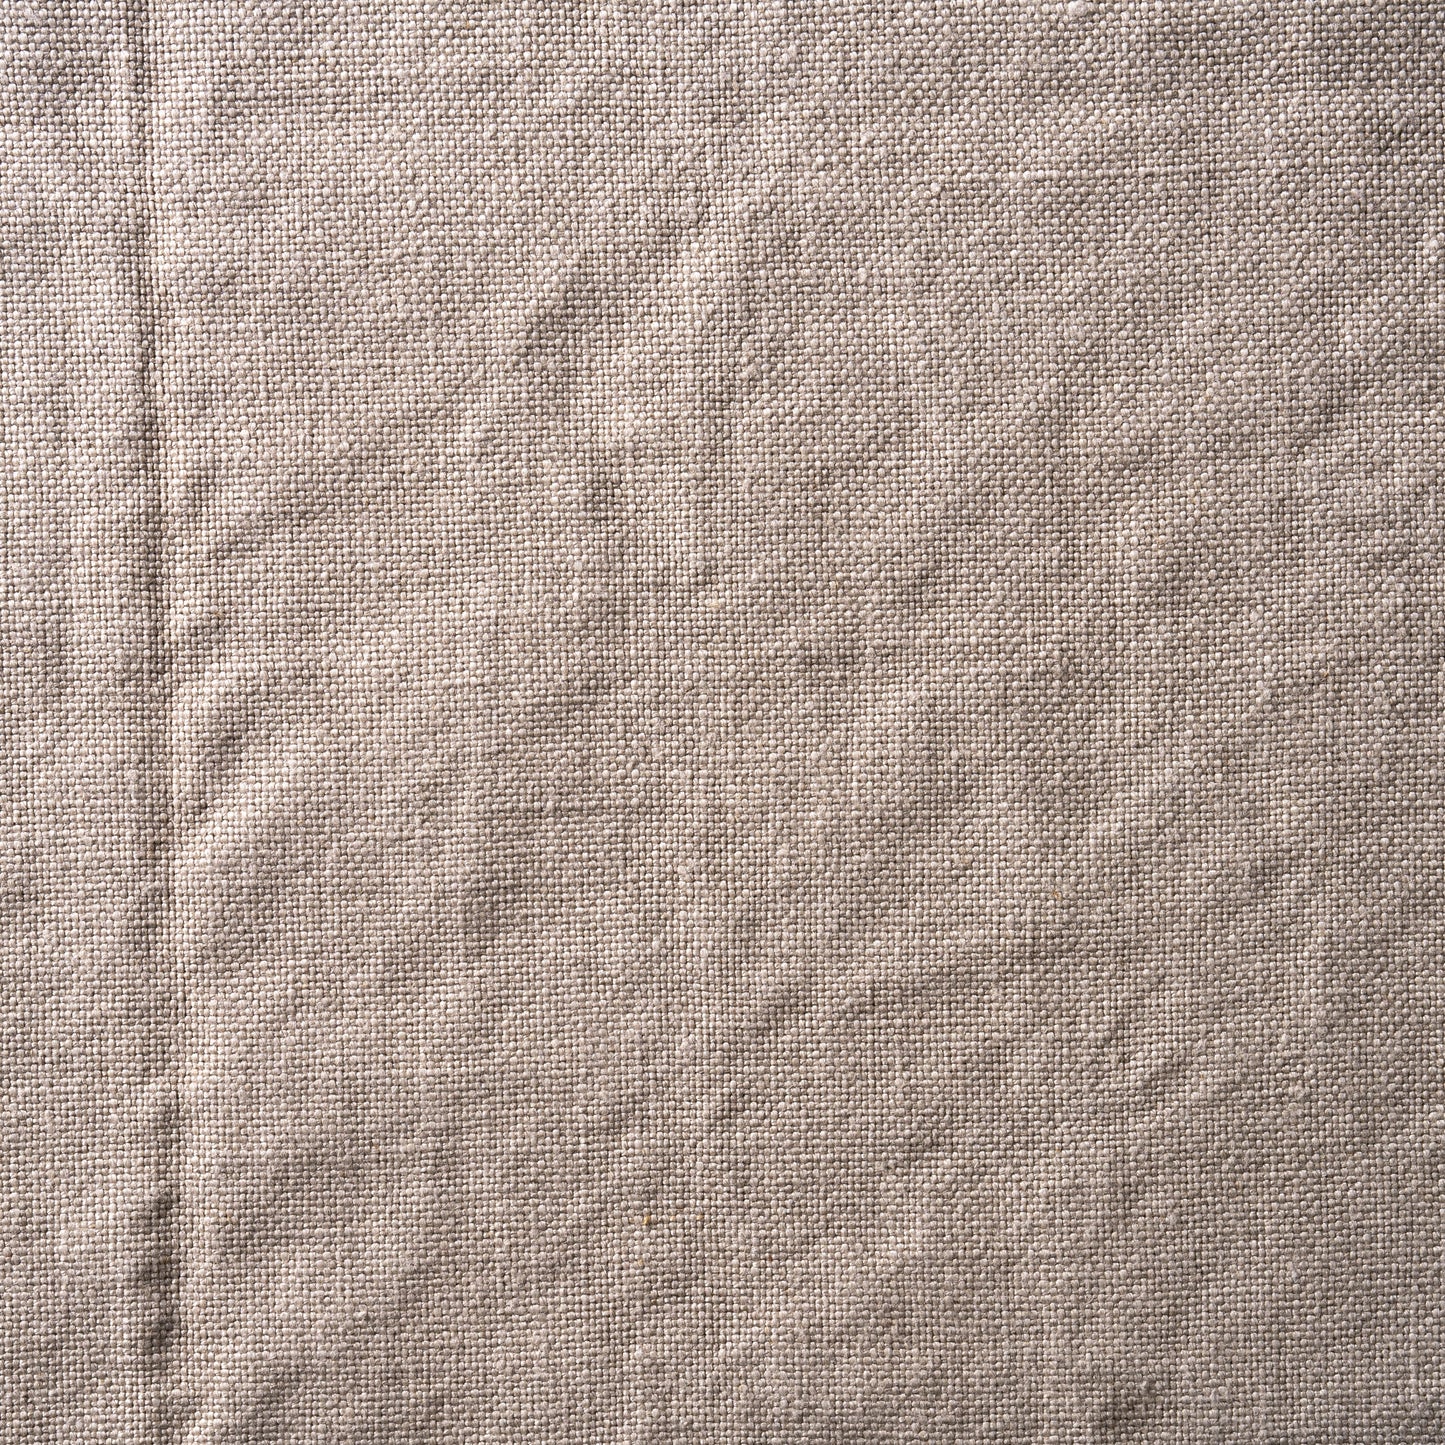 11 oz/sq yard 100% Home Furnishing Weight Linen in Natural Swatch